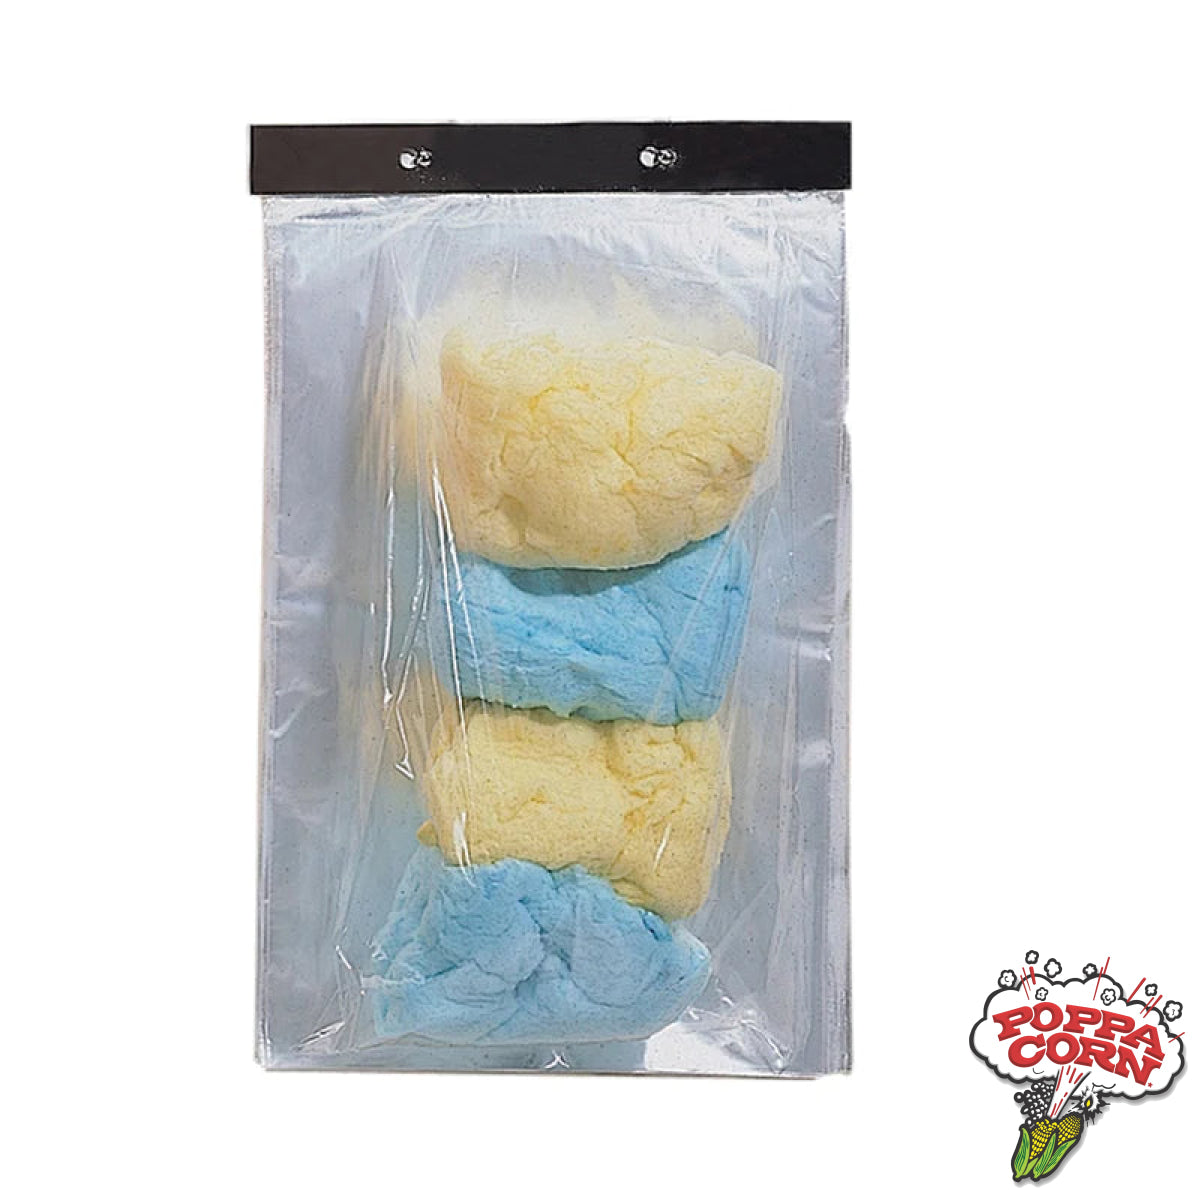 Plain Cotton Candy Bags - 1000 in a case - FLB003 - Poppa Corn Corp